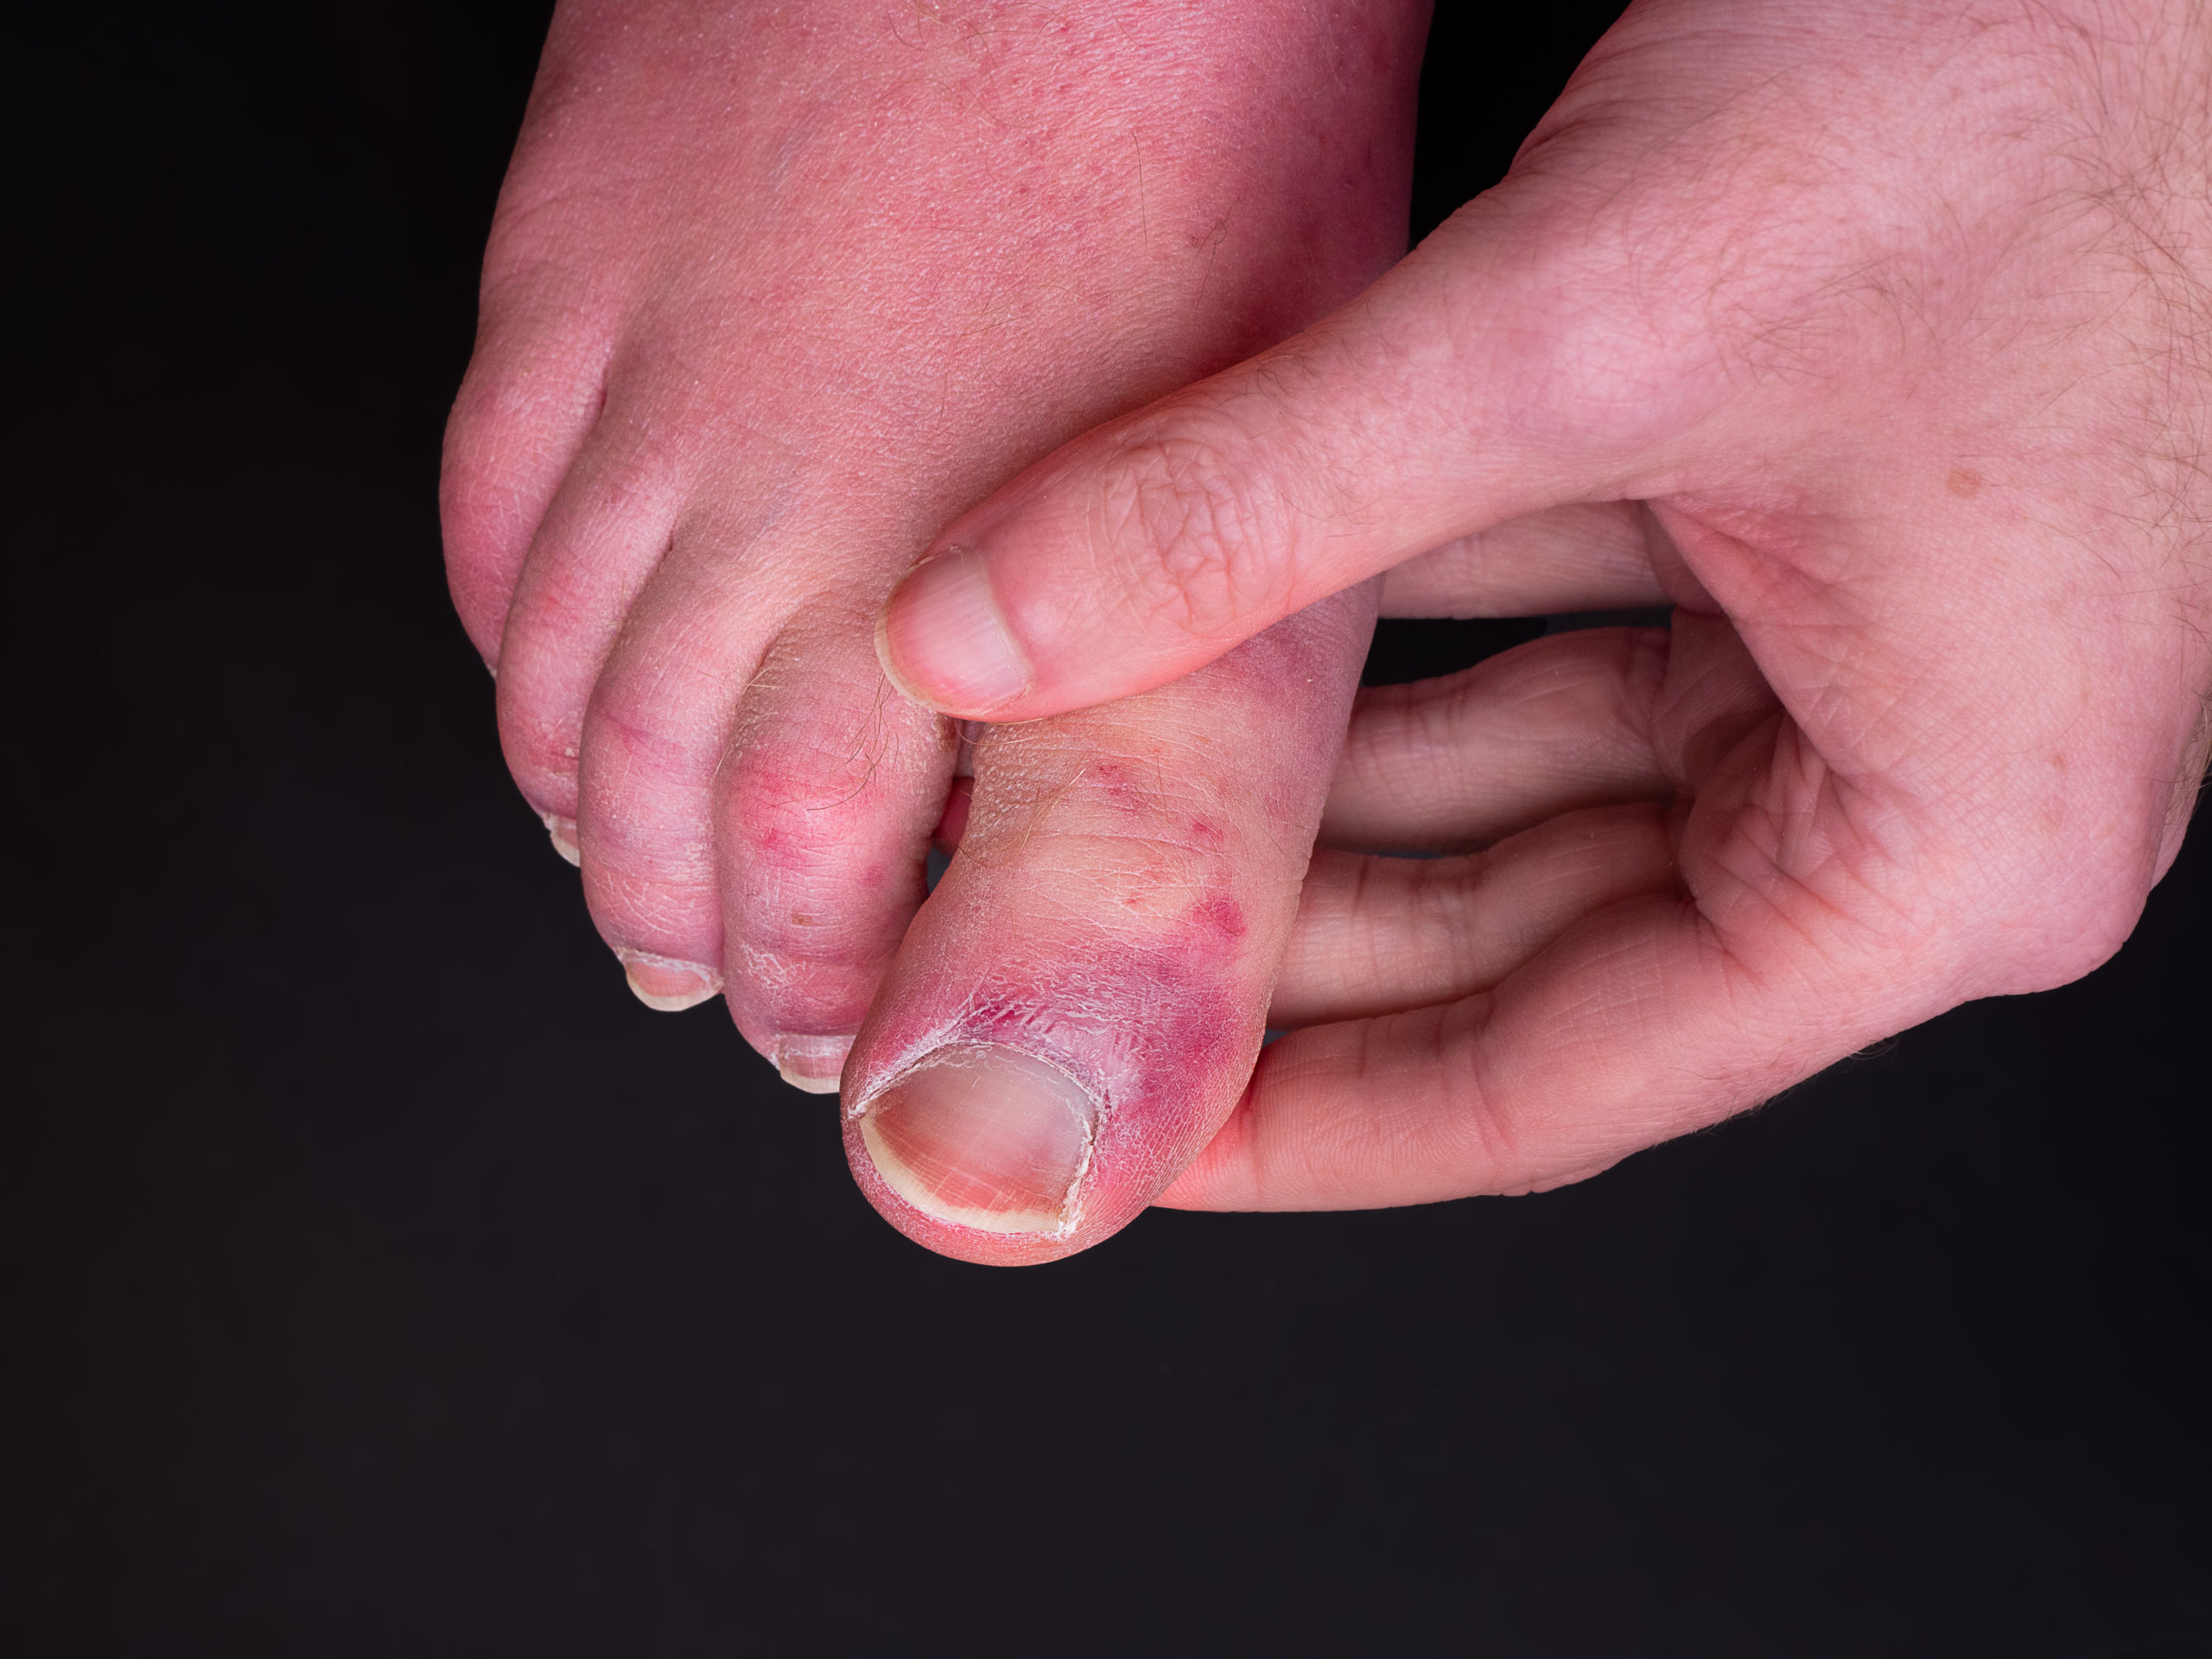 Why are my toes red? Causes, other symptoms, and treatments